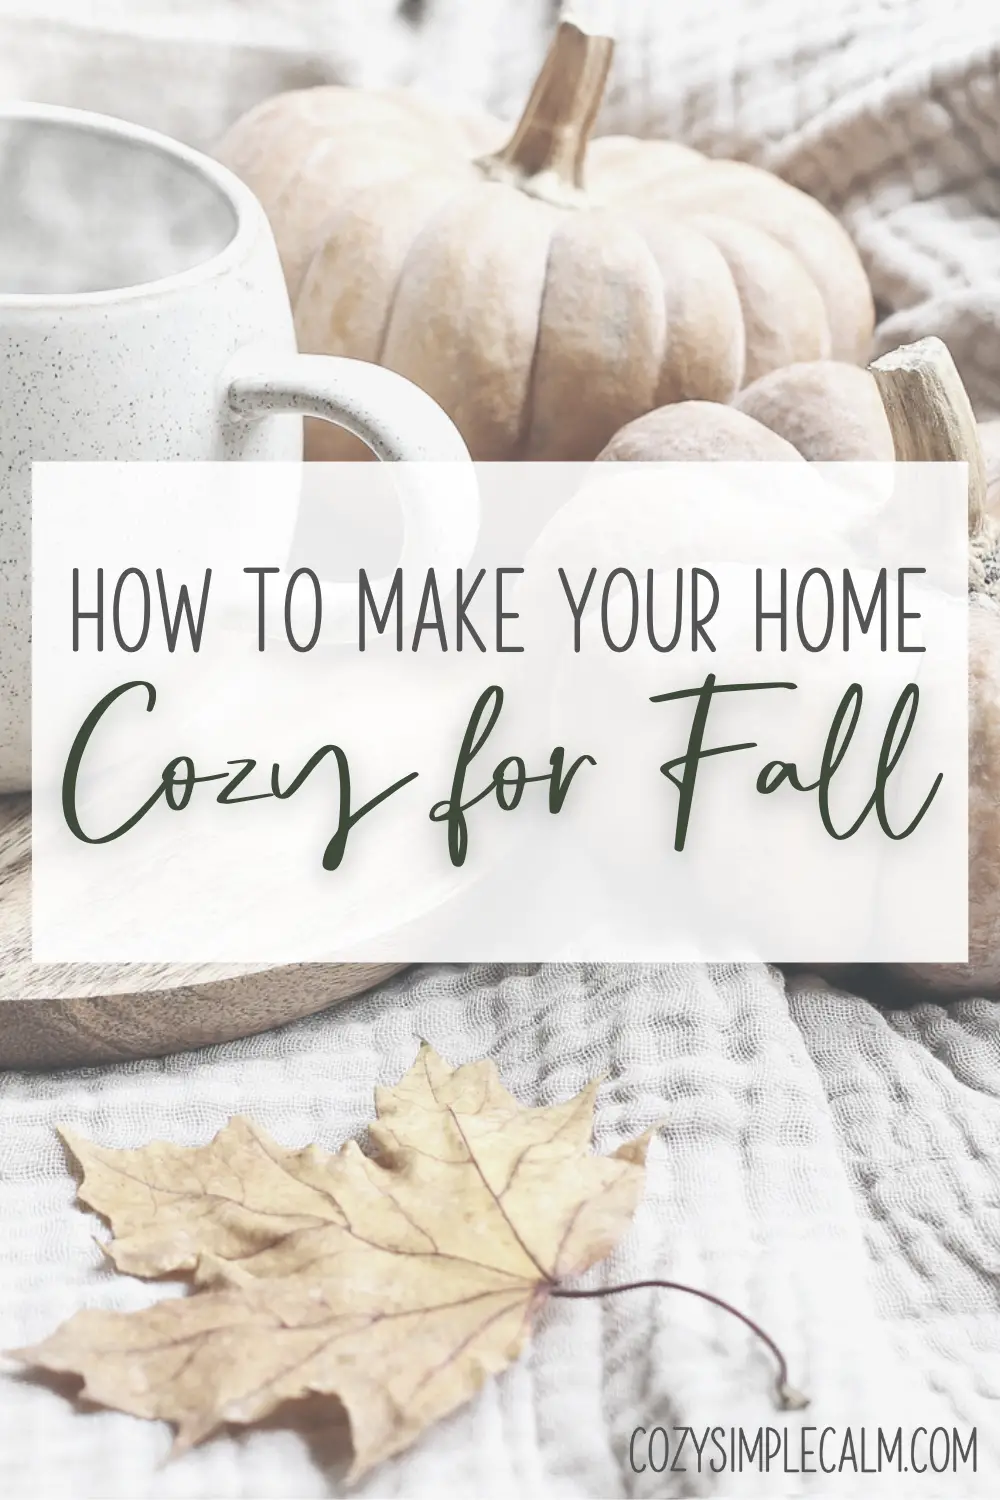 Image of small pumpkins, coffee mug, and fall leaves sitting on blanket - Text overlay: How to make your home cozy for fall - cozysimplecalm.com